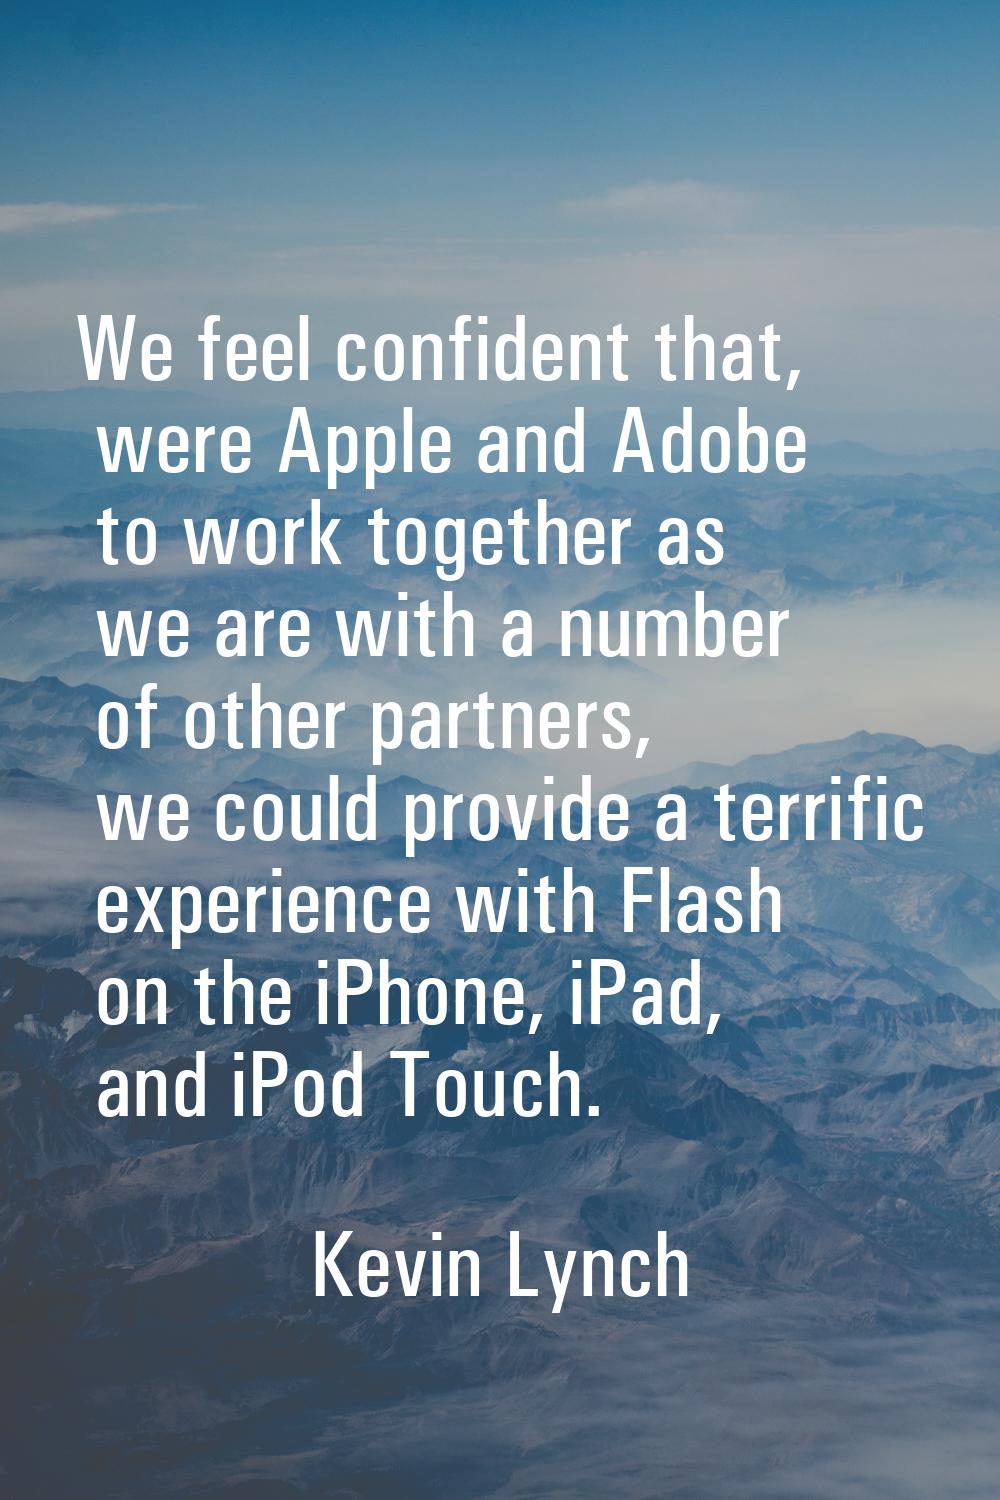 We feel confident that, were Apple and Adobe to work together as we are with a number of other part